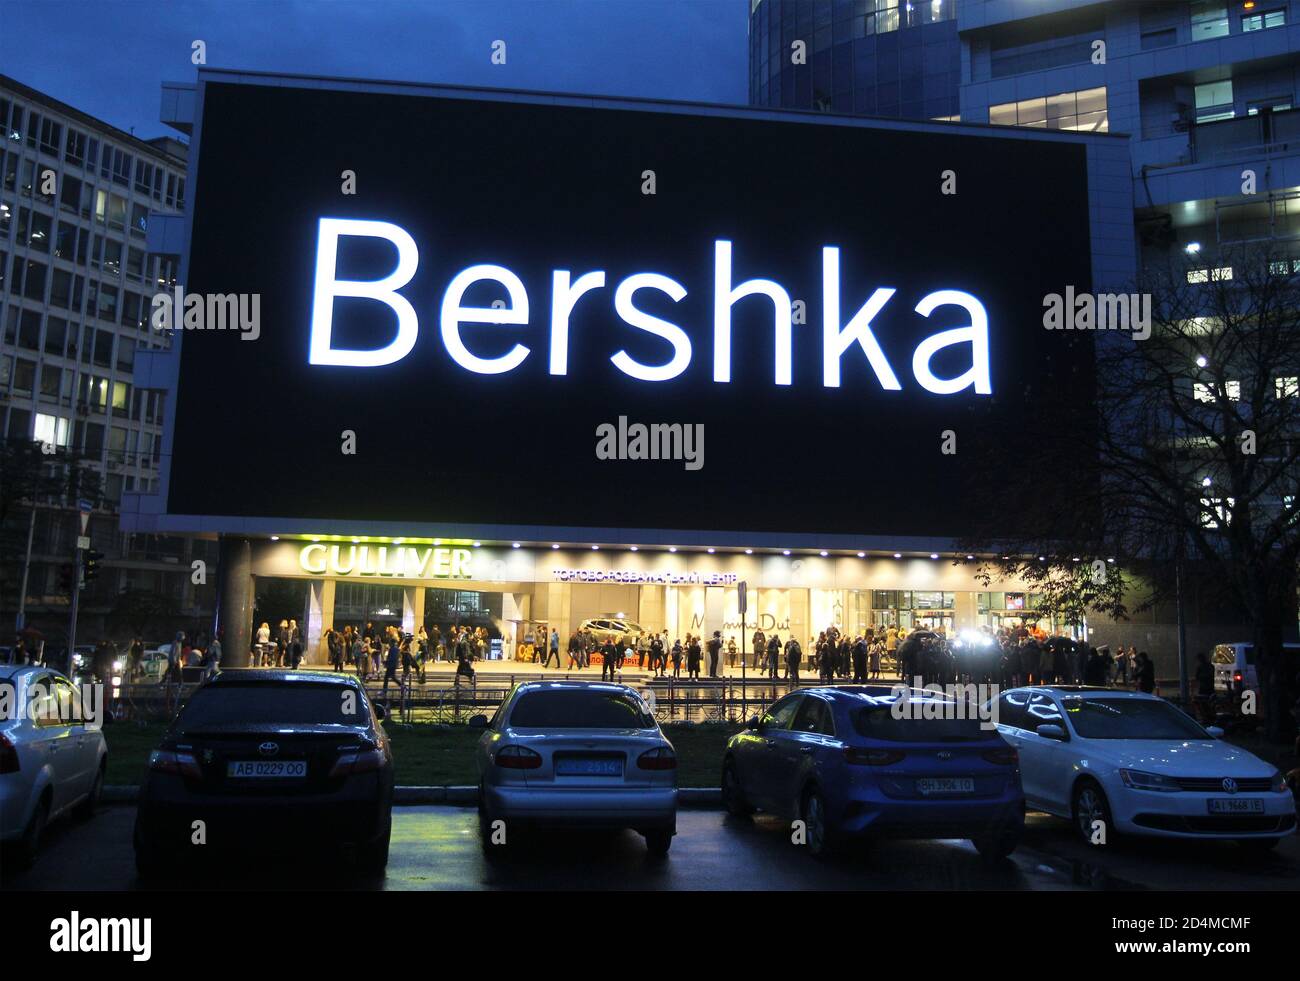 A huge screen shows the logo Bershka on a shopping mall building in downtown Kiev. Stock Photo